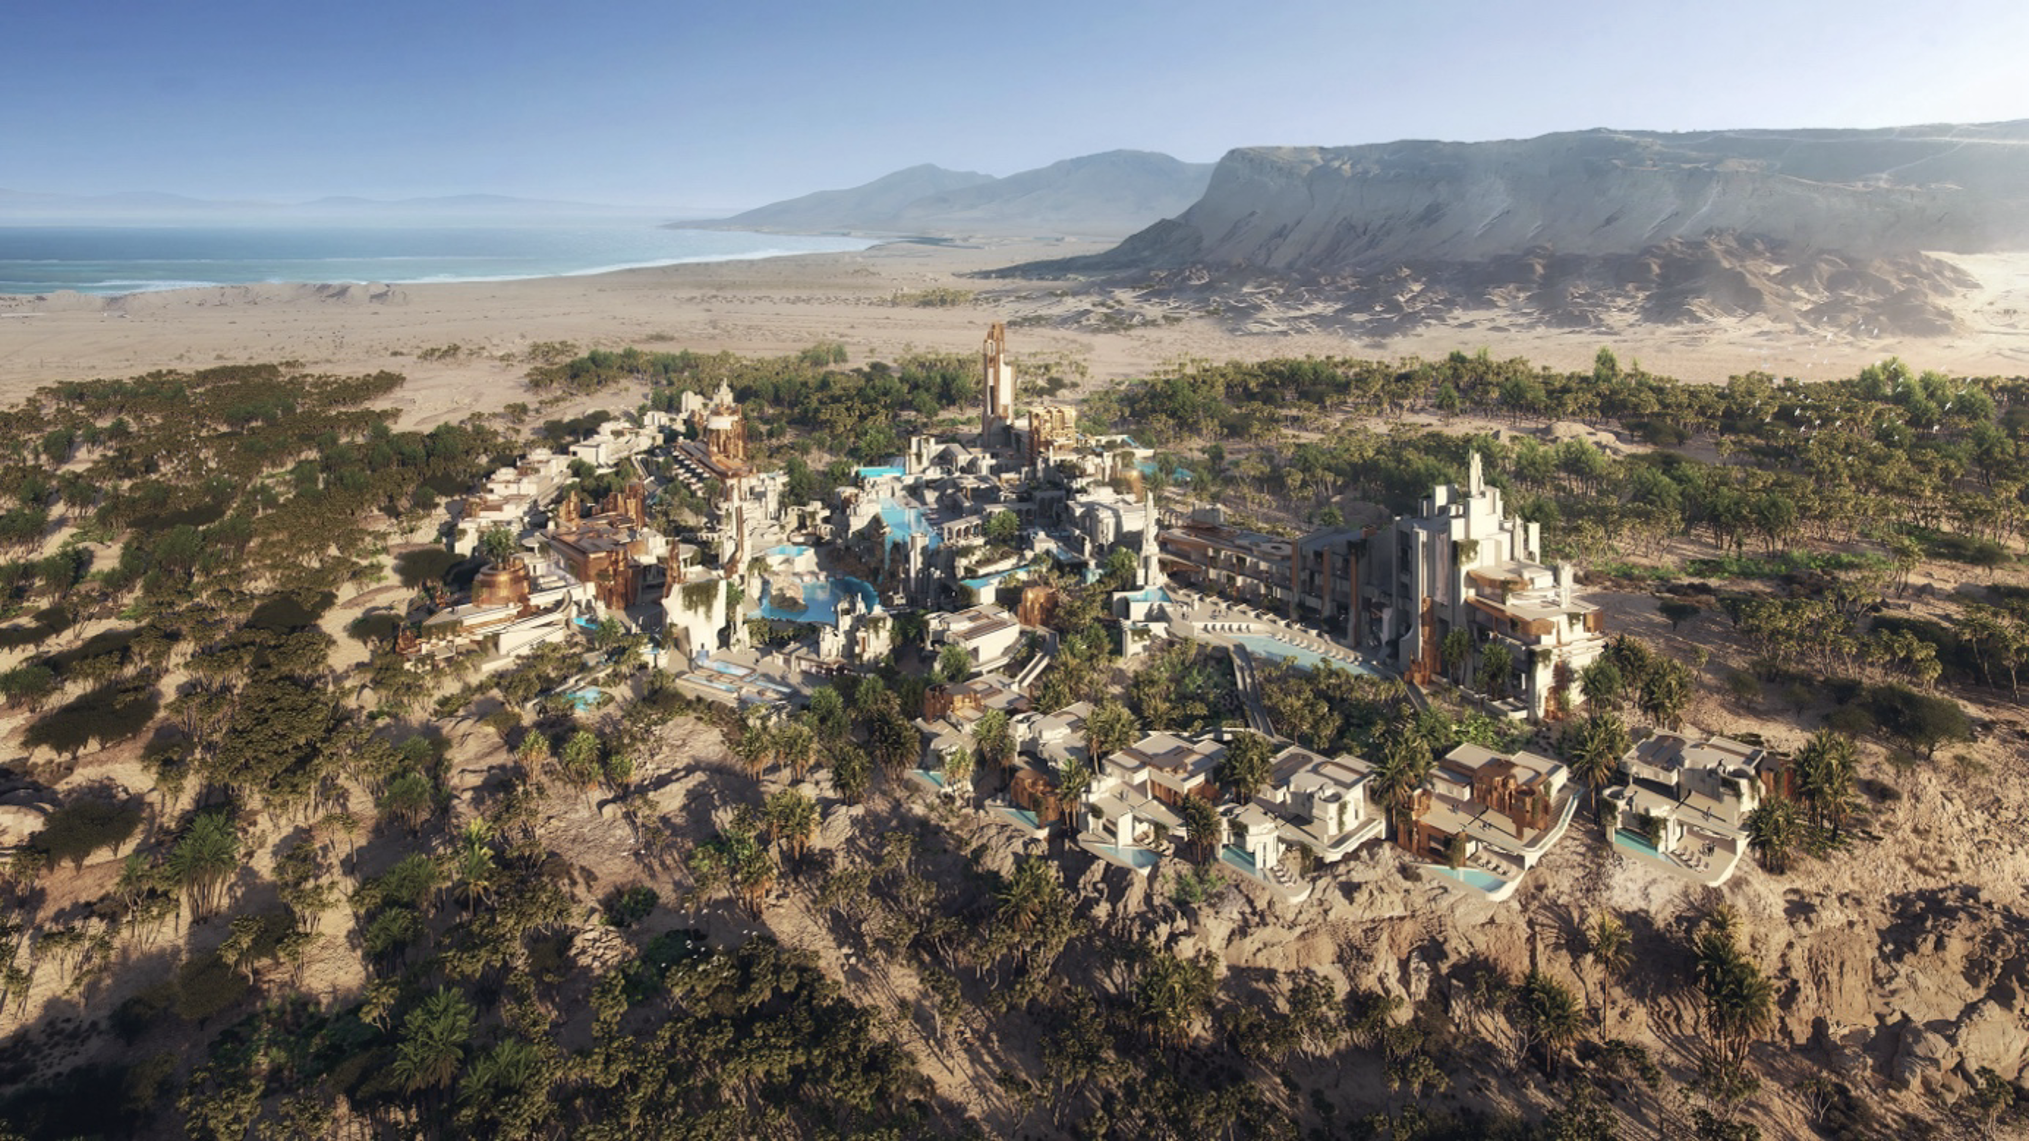 ELANAN: AN OASIS OF WELL-BEING IN THE HEART OF NEOMNEOM